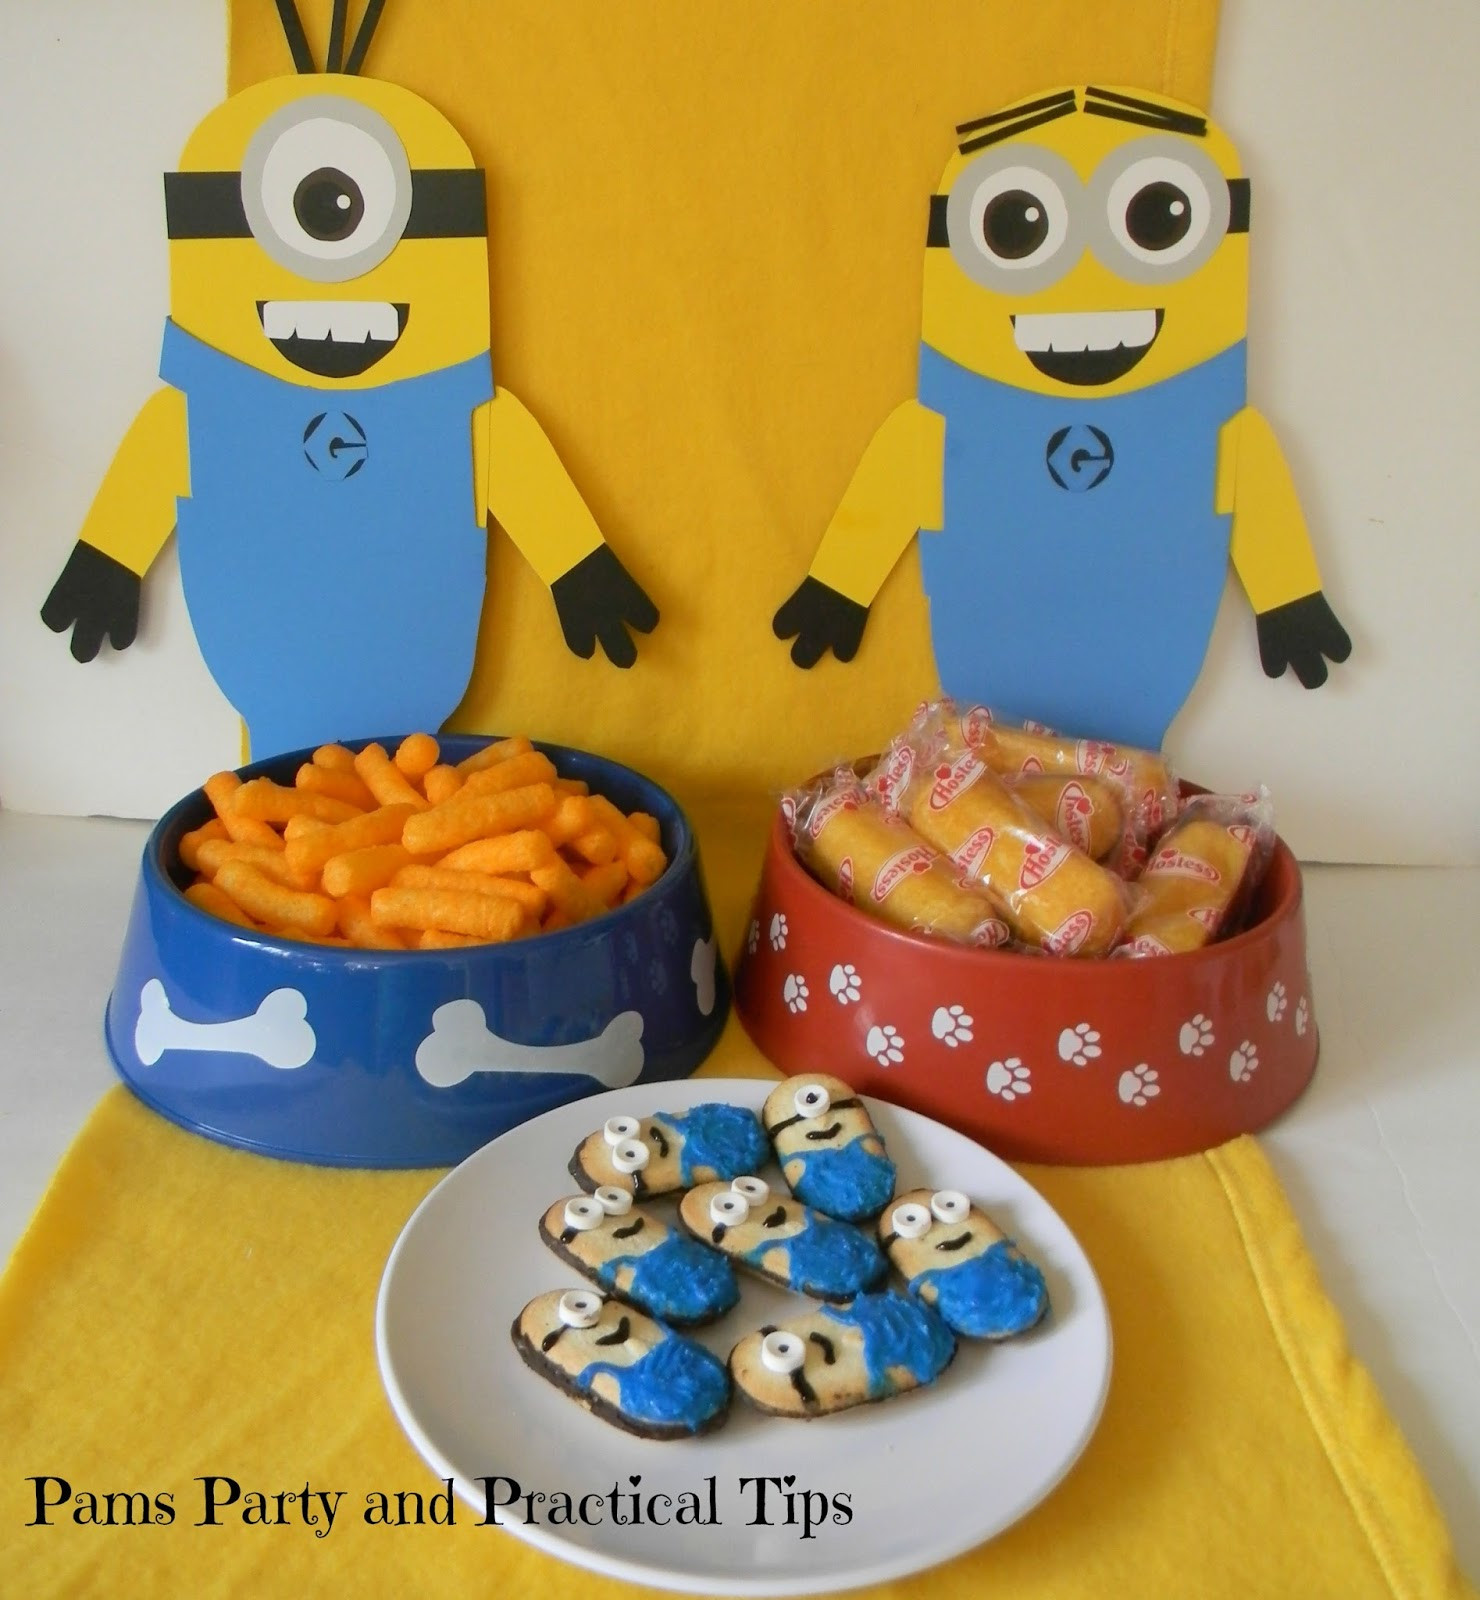 Despicable Me Party Food Ideas
 Pams Party & Practical Tips Despicable Me Party Food and